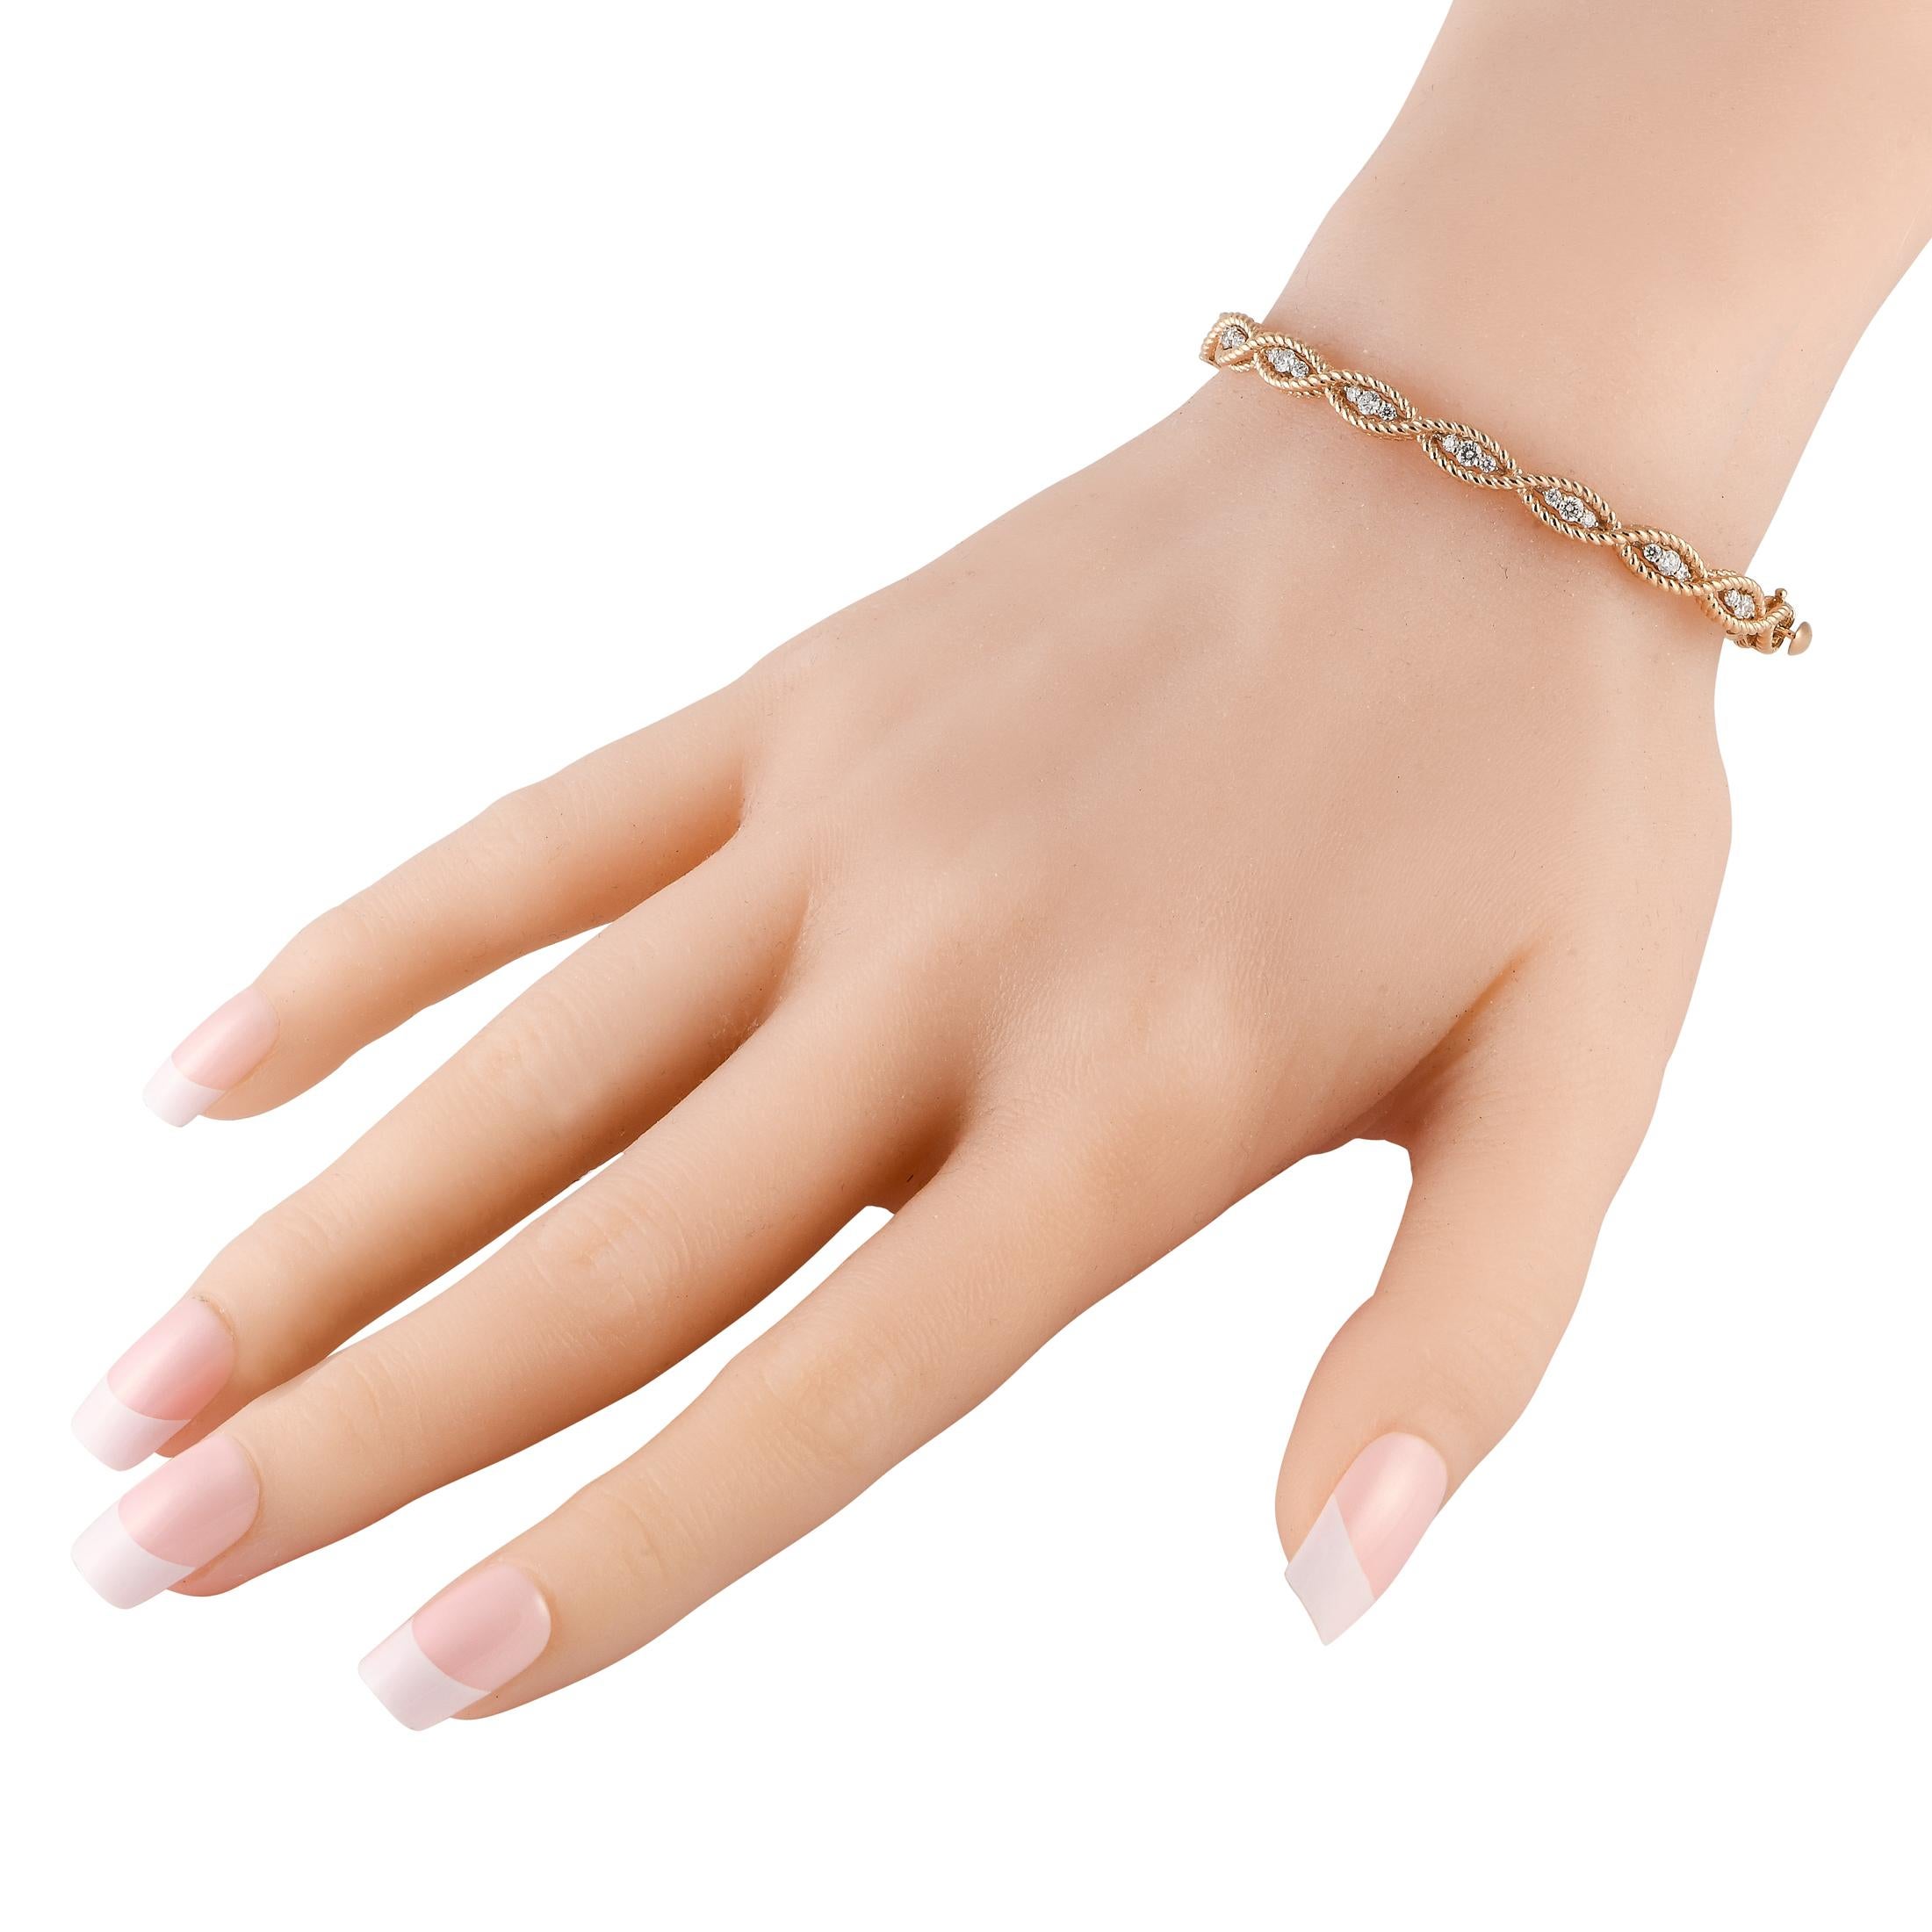 Bring chic elegance to your daily wear or special occasion outfit with this Roberto Coin bracelet. This meticulously detailed bangle features a braided design forming marquise-shaped links punctuated inside with a trio of diamonds. This creation is